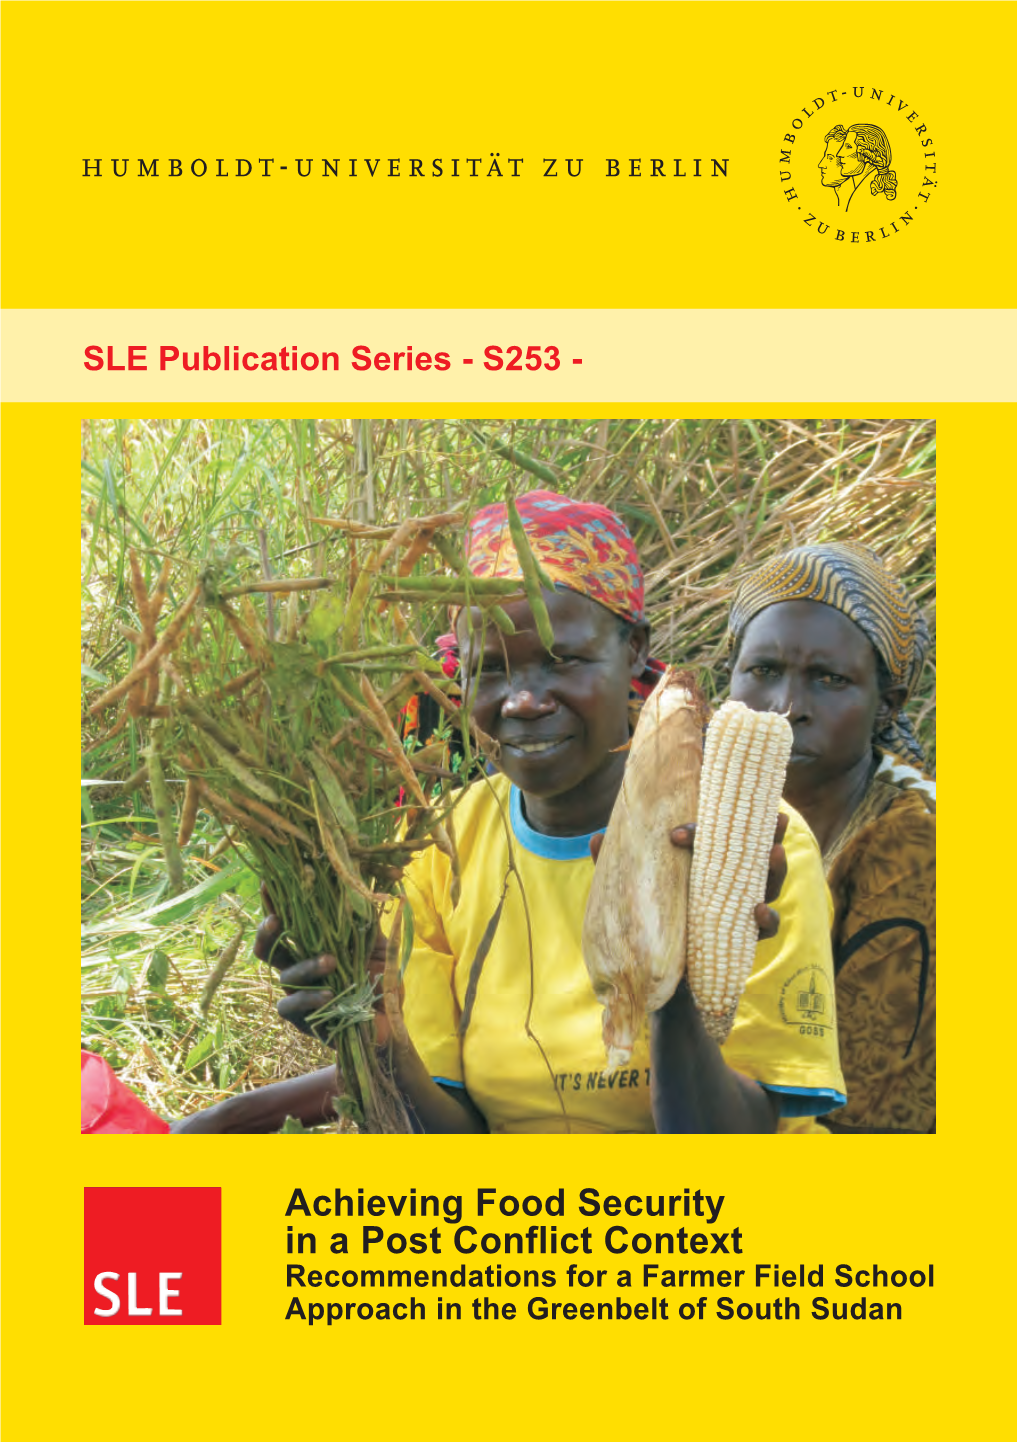 Recommendations for a Farmer Field School Approach in the Greenbelt of South Sudan